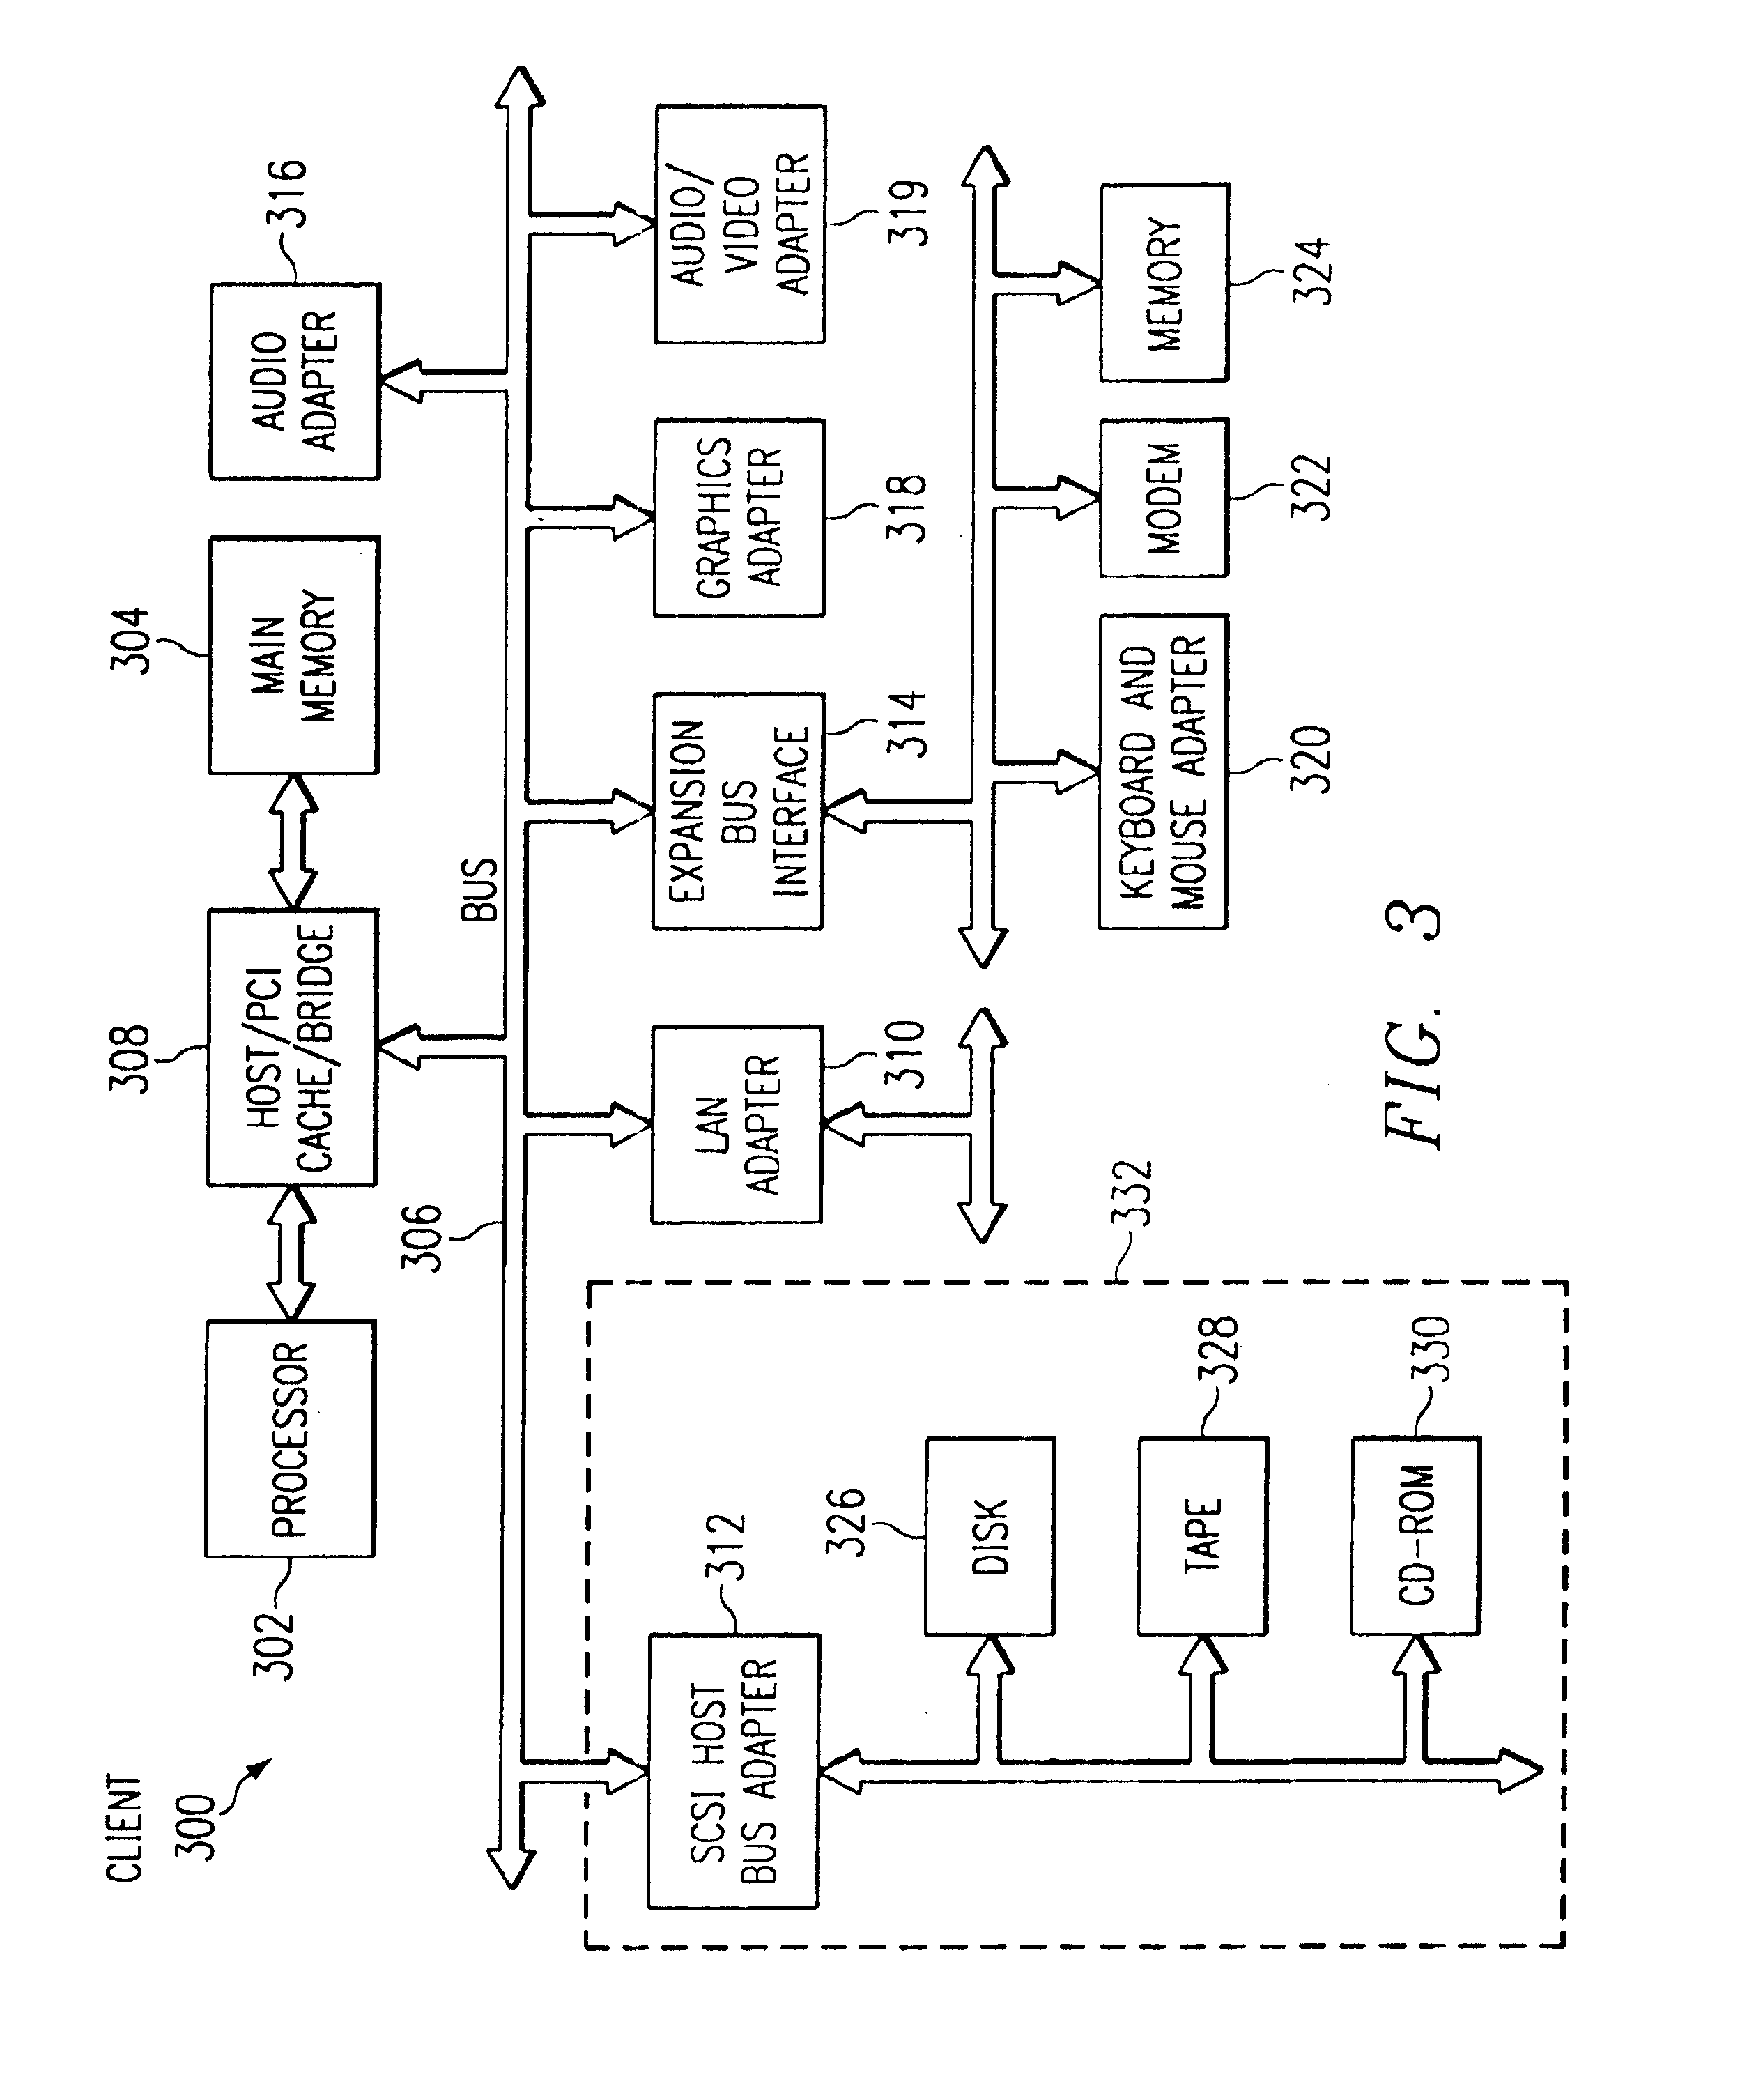 Method and a system for managing shell script file development and execution